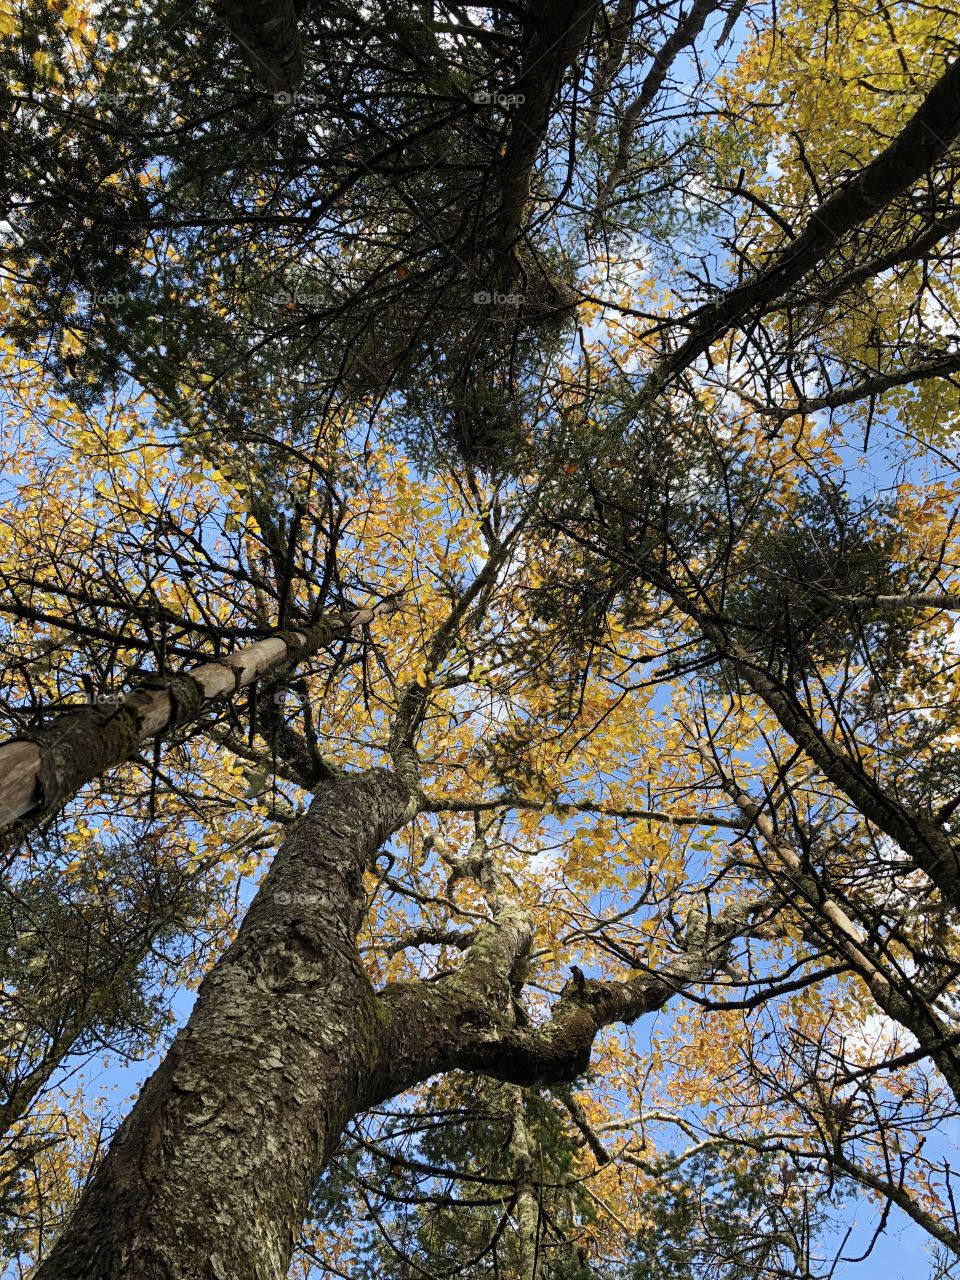 Looking up in fall